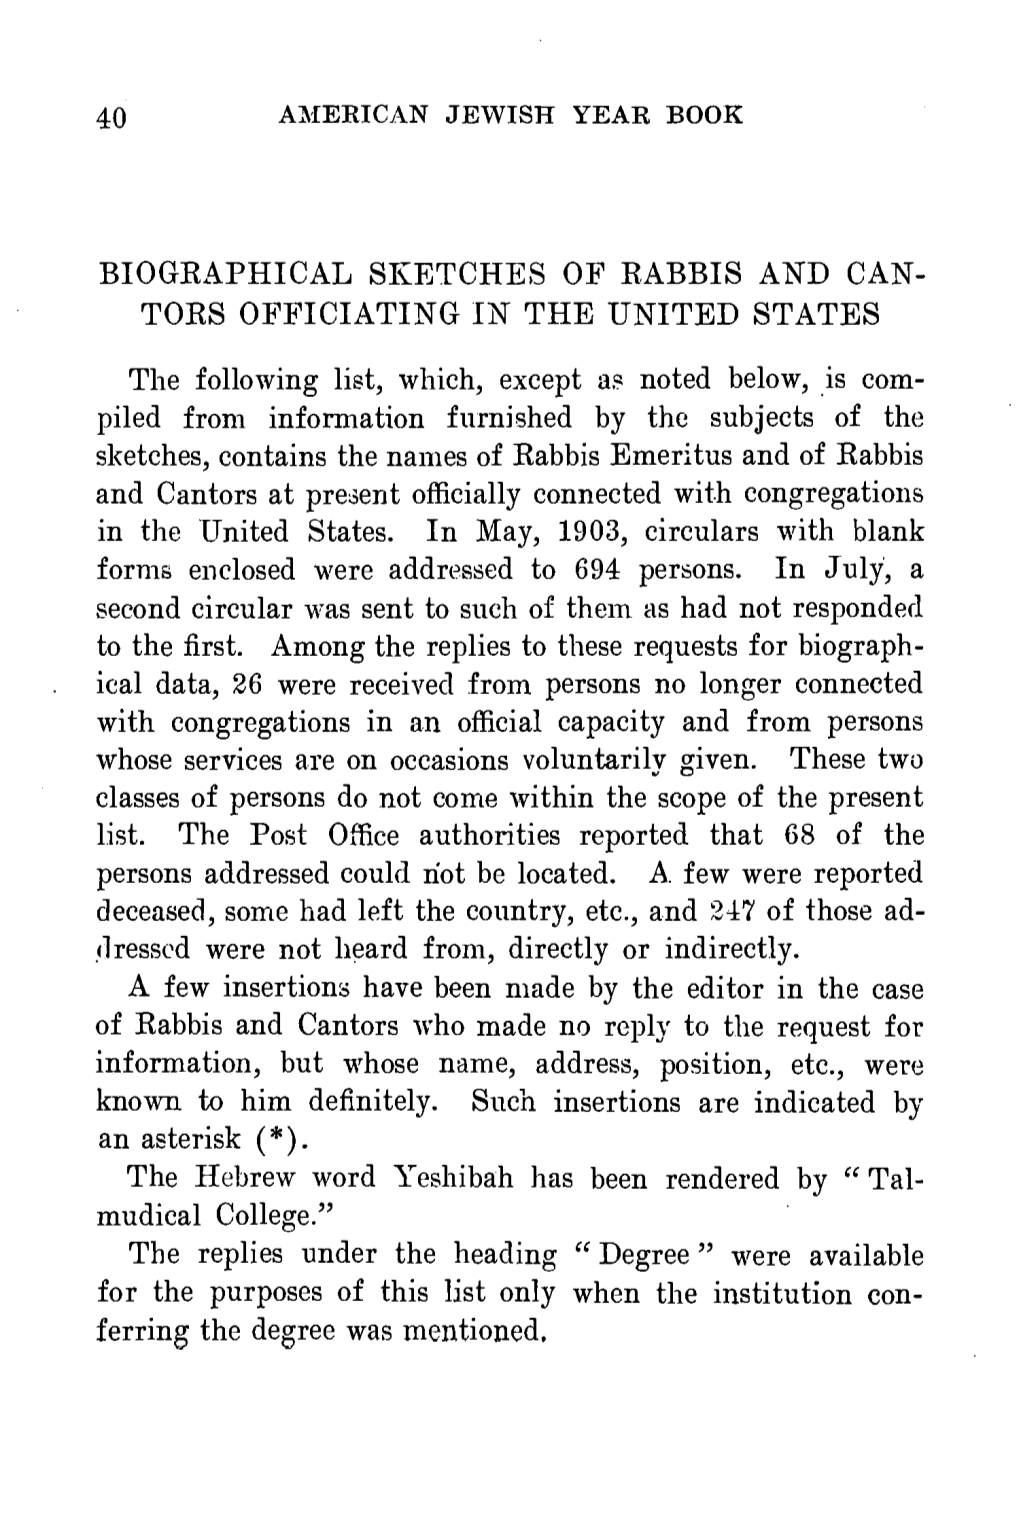 Biographical Sketches of Rabbis and Can- Tors Officiating in the United States